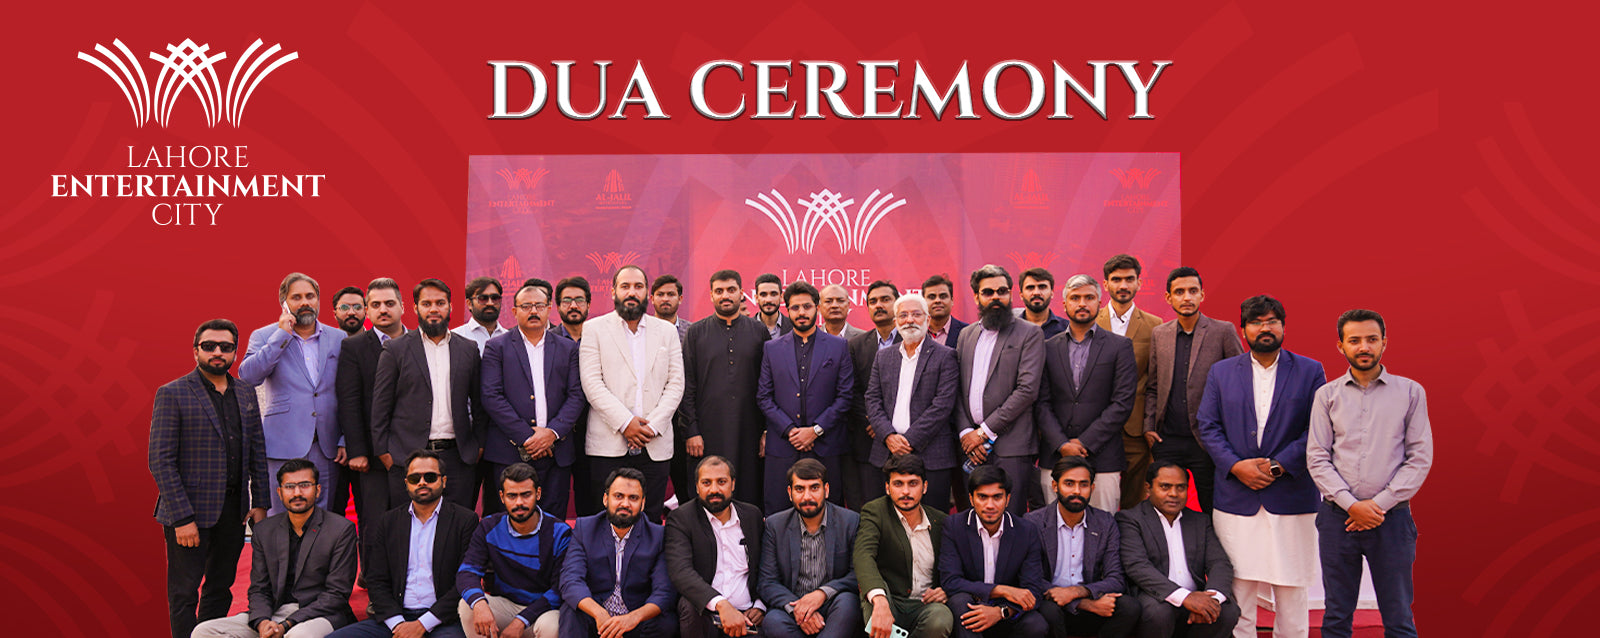 Celebrating Unity and Well Wishes: Lahore Entertainment City's Dua Ceremony